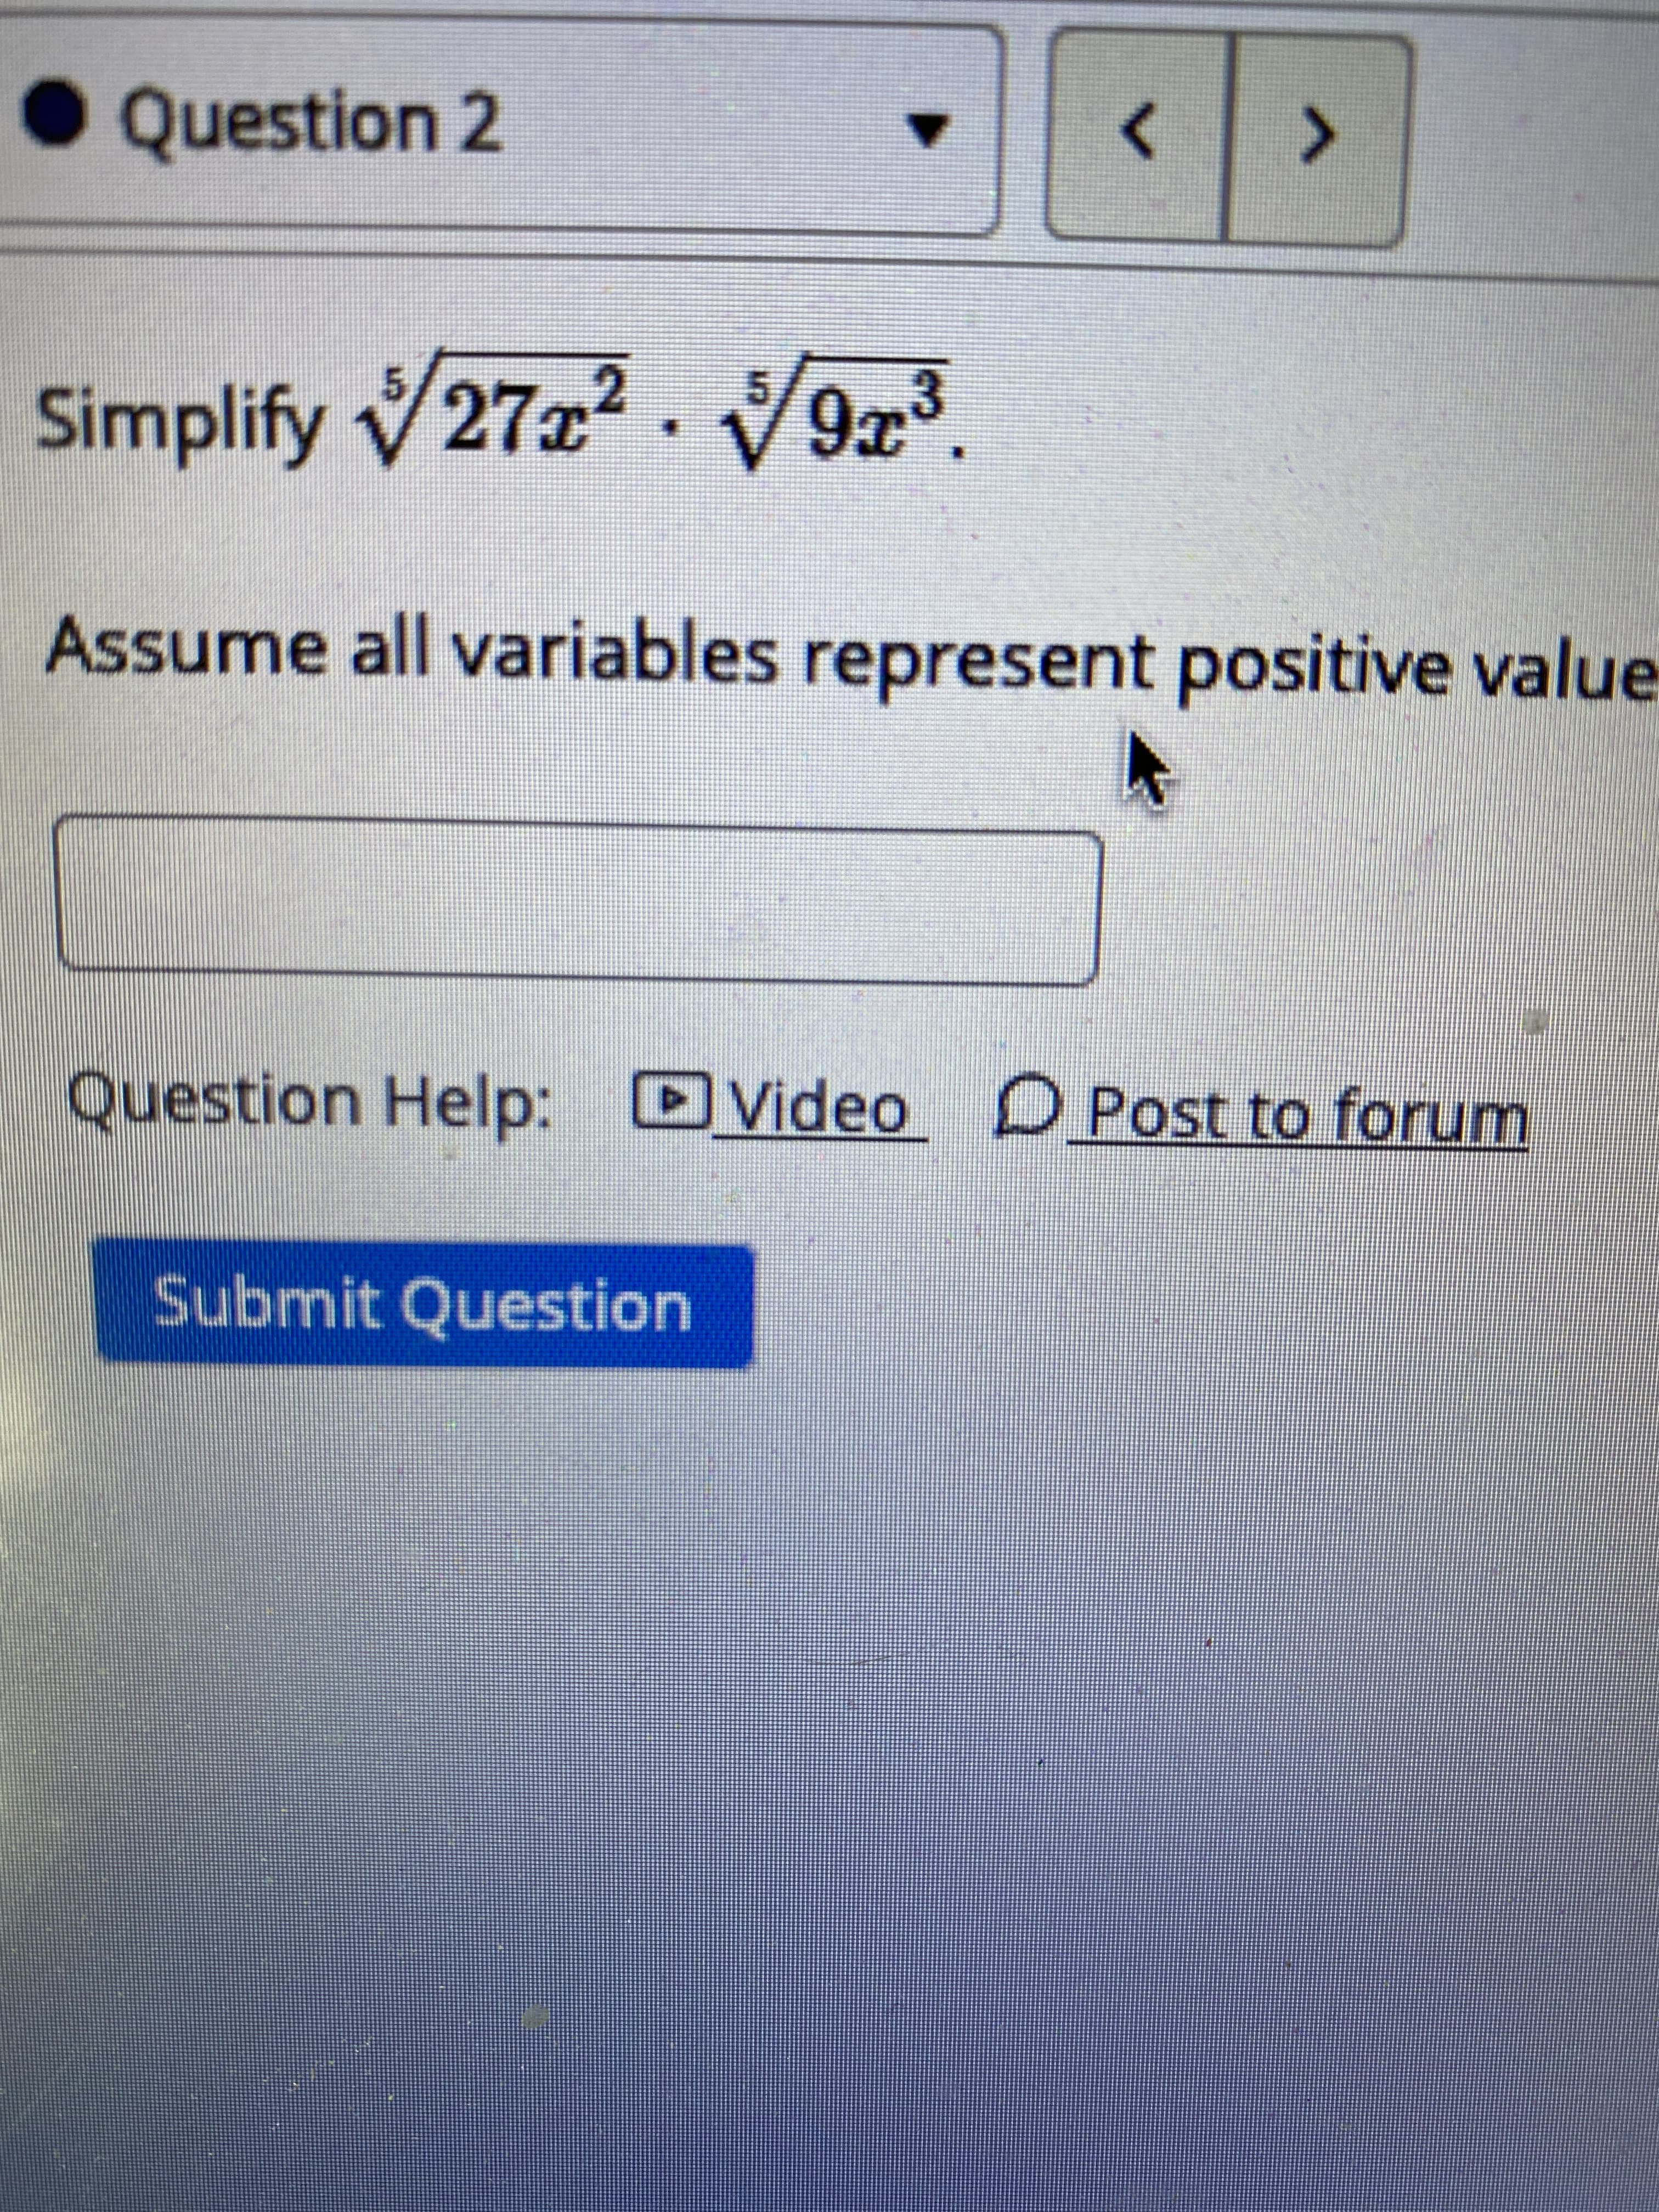 • Question 2
Simplify 27x². 9x3.
Assume all variables represent positive value
Question Help: Video
D Post to forum
Submit Question
